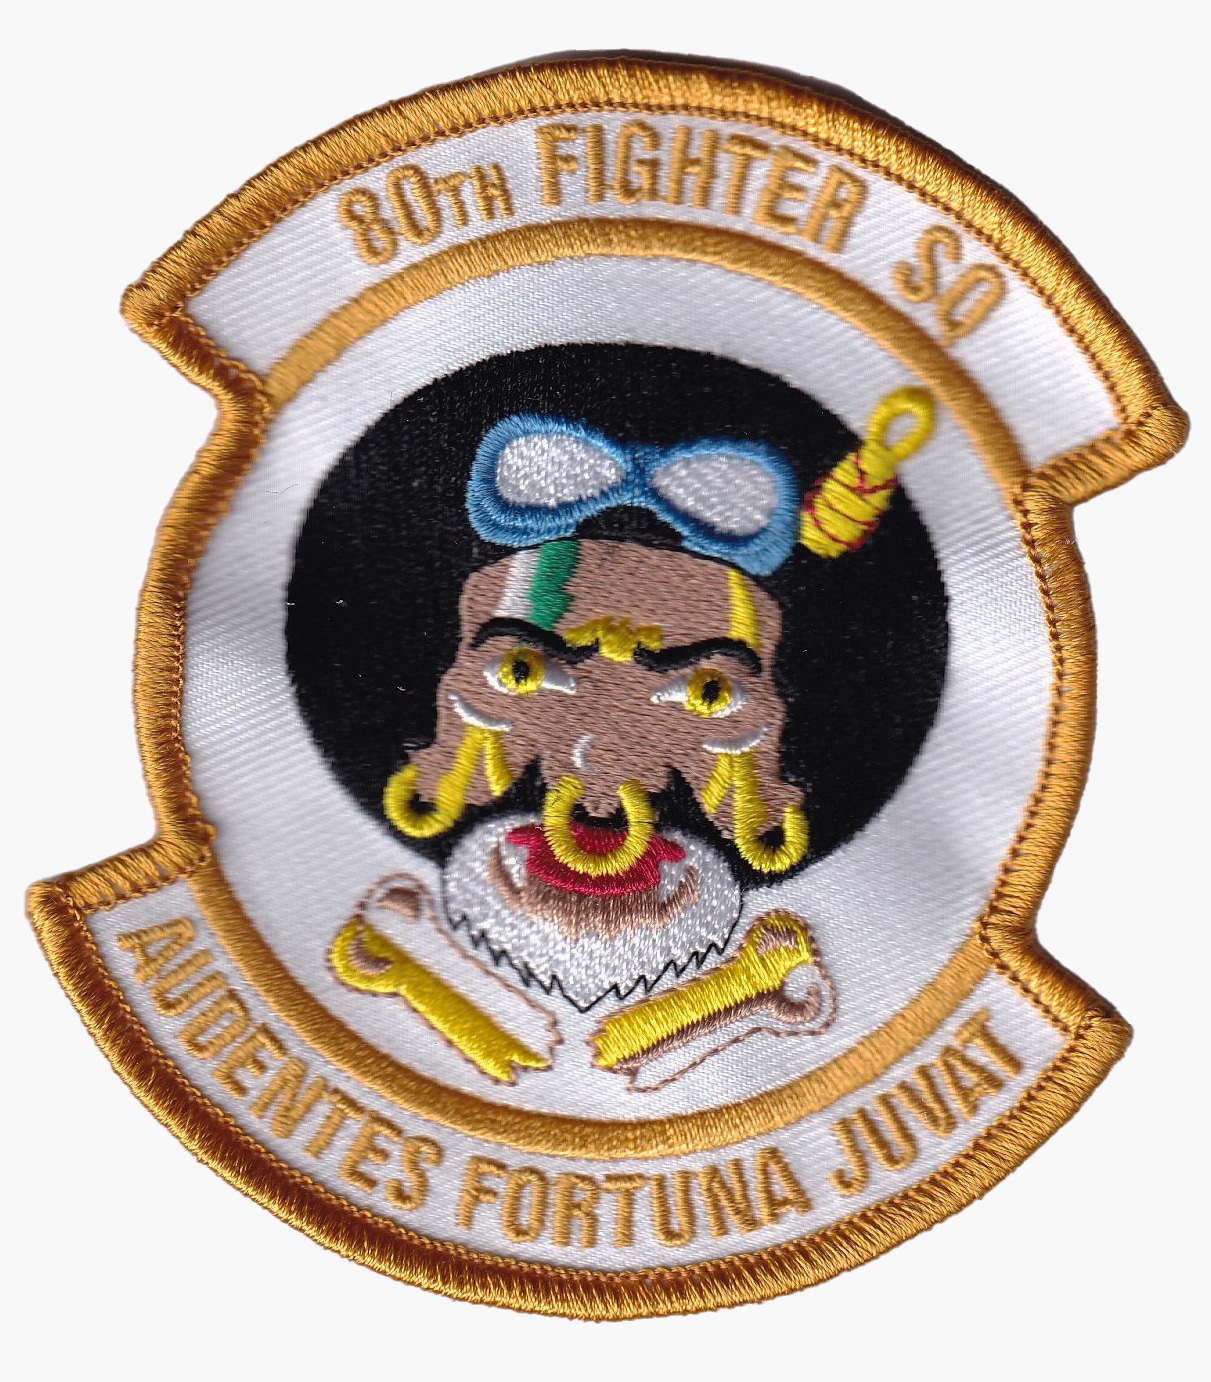 80th Fighter Squadron Patch - Plastic Backing, 4"